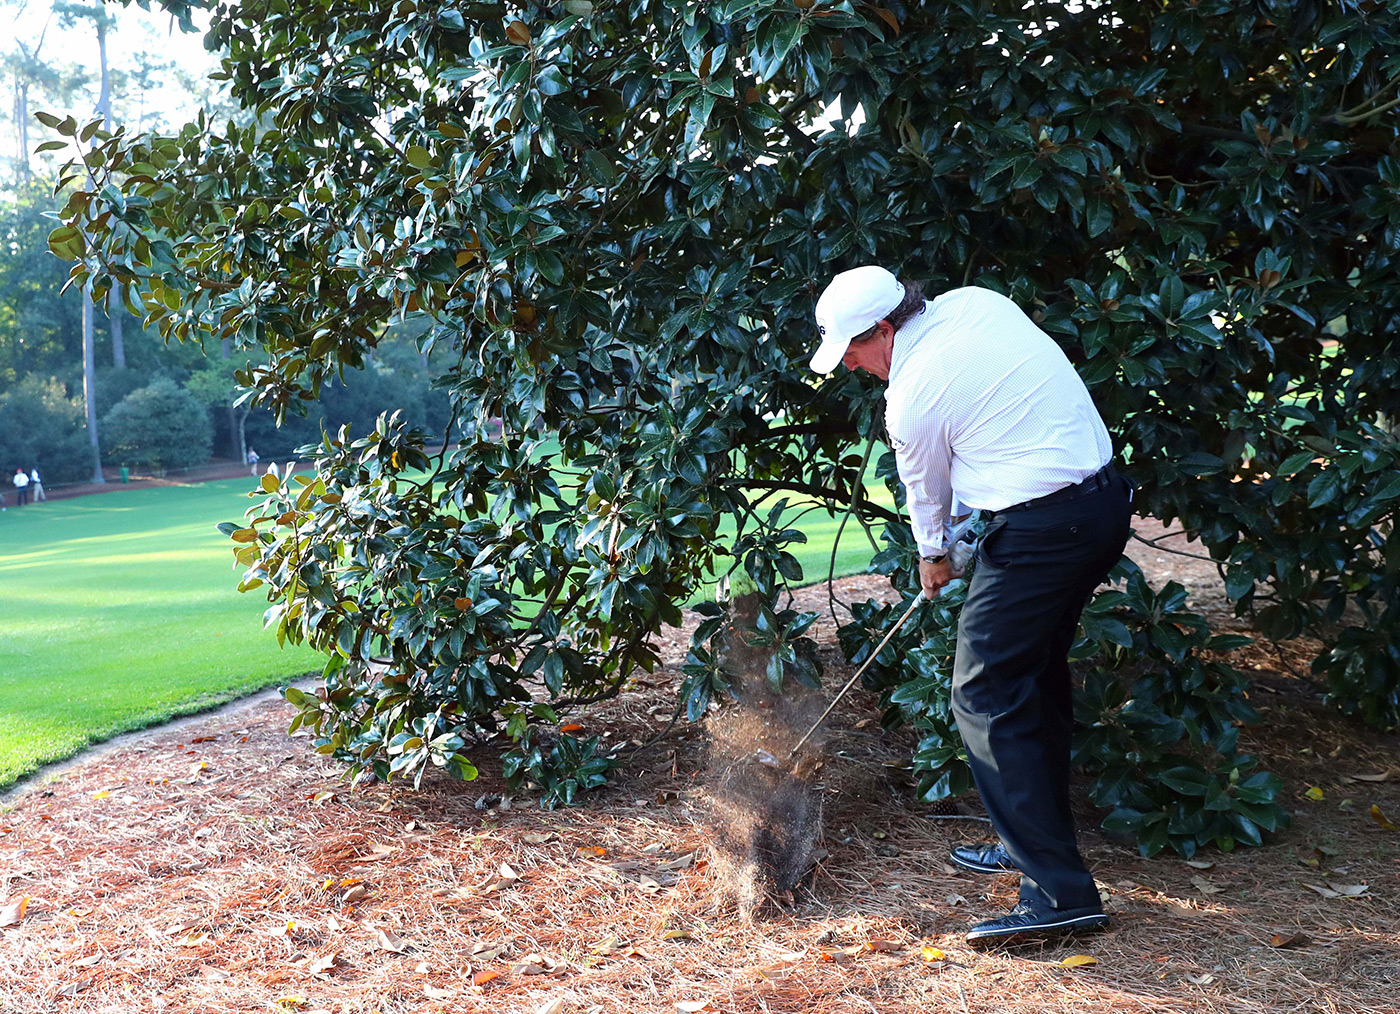 Phil Mickelson plays a practice round at the 2018 Masters.